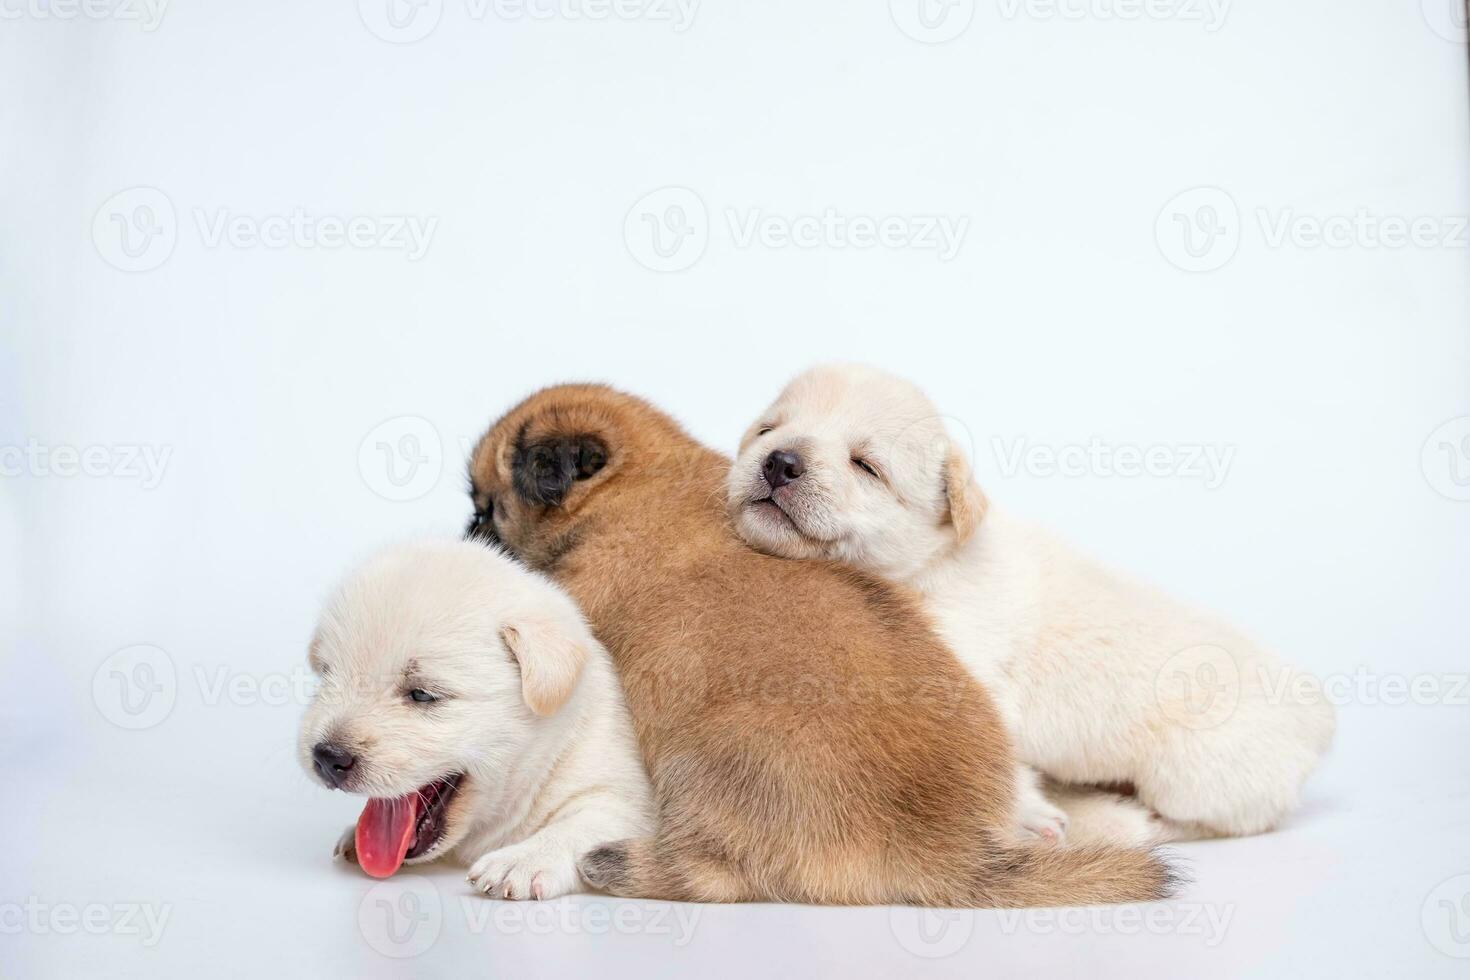 Cute newborn of puppy dog isolated on white background, Group of small puppy white and brown dog photo